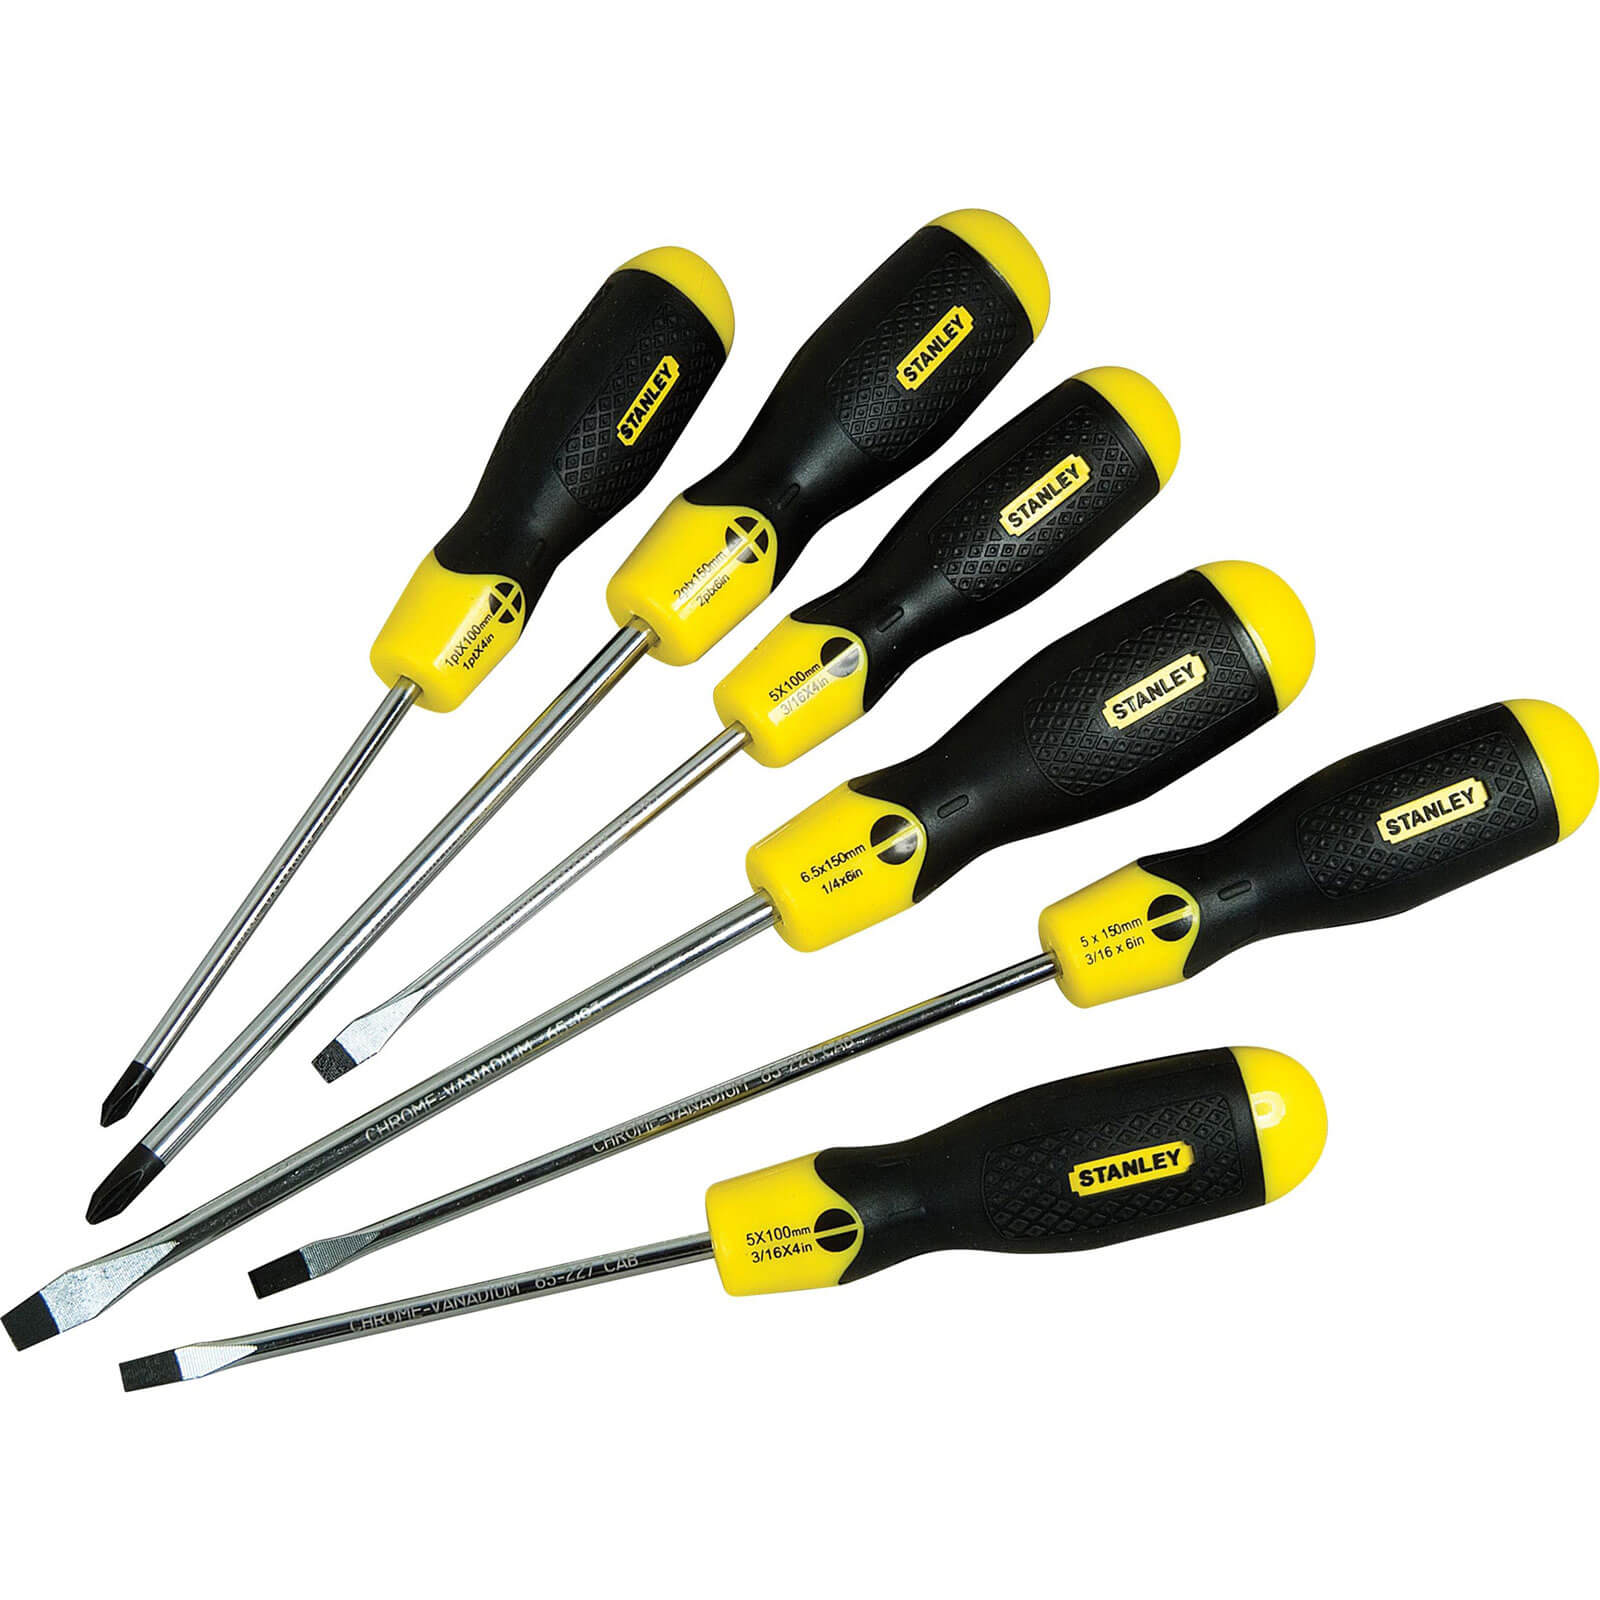 Photo of Stanley 6 Piece Cushion Grip Phillips And Slotted Screwdriver Set